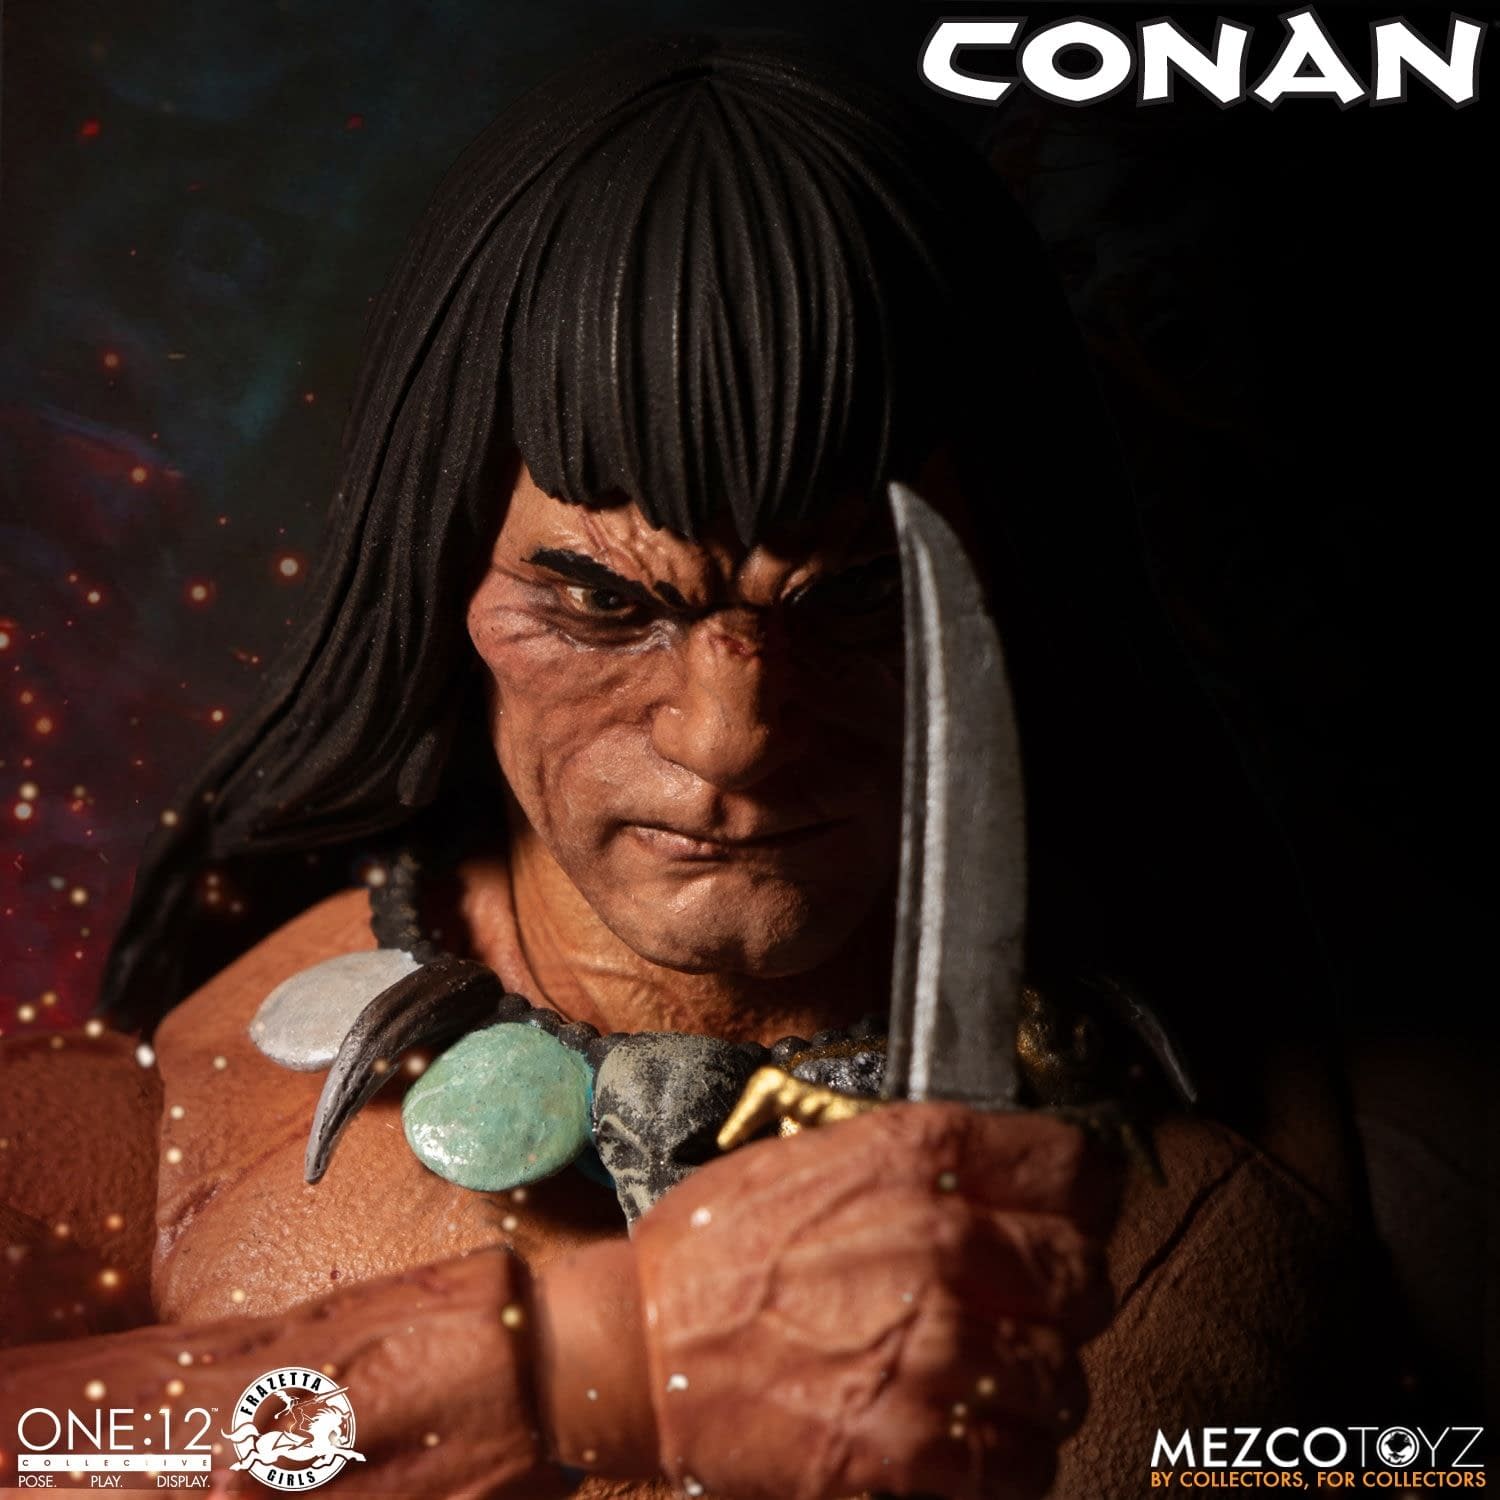 Conan the Barbarian Arrives with New Figure from Mezco Toyz